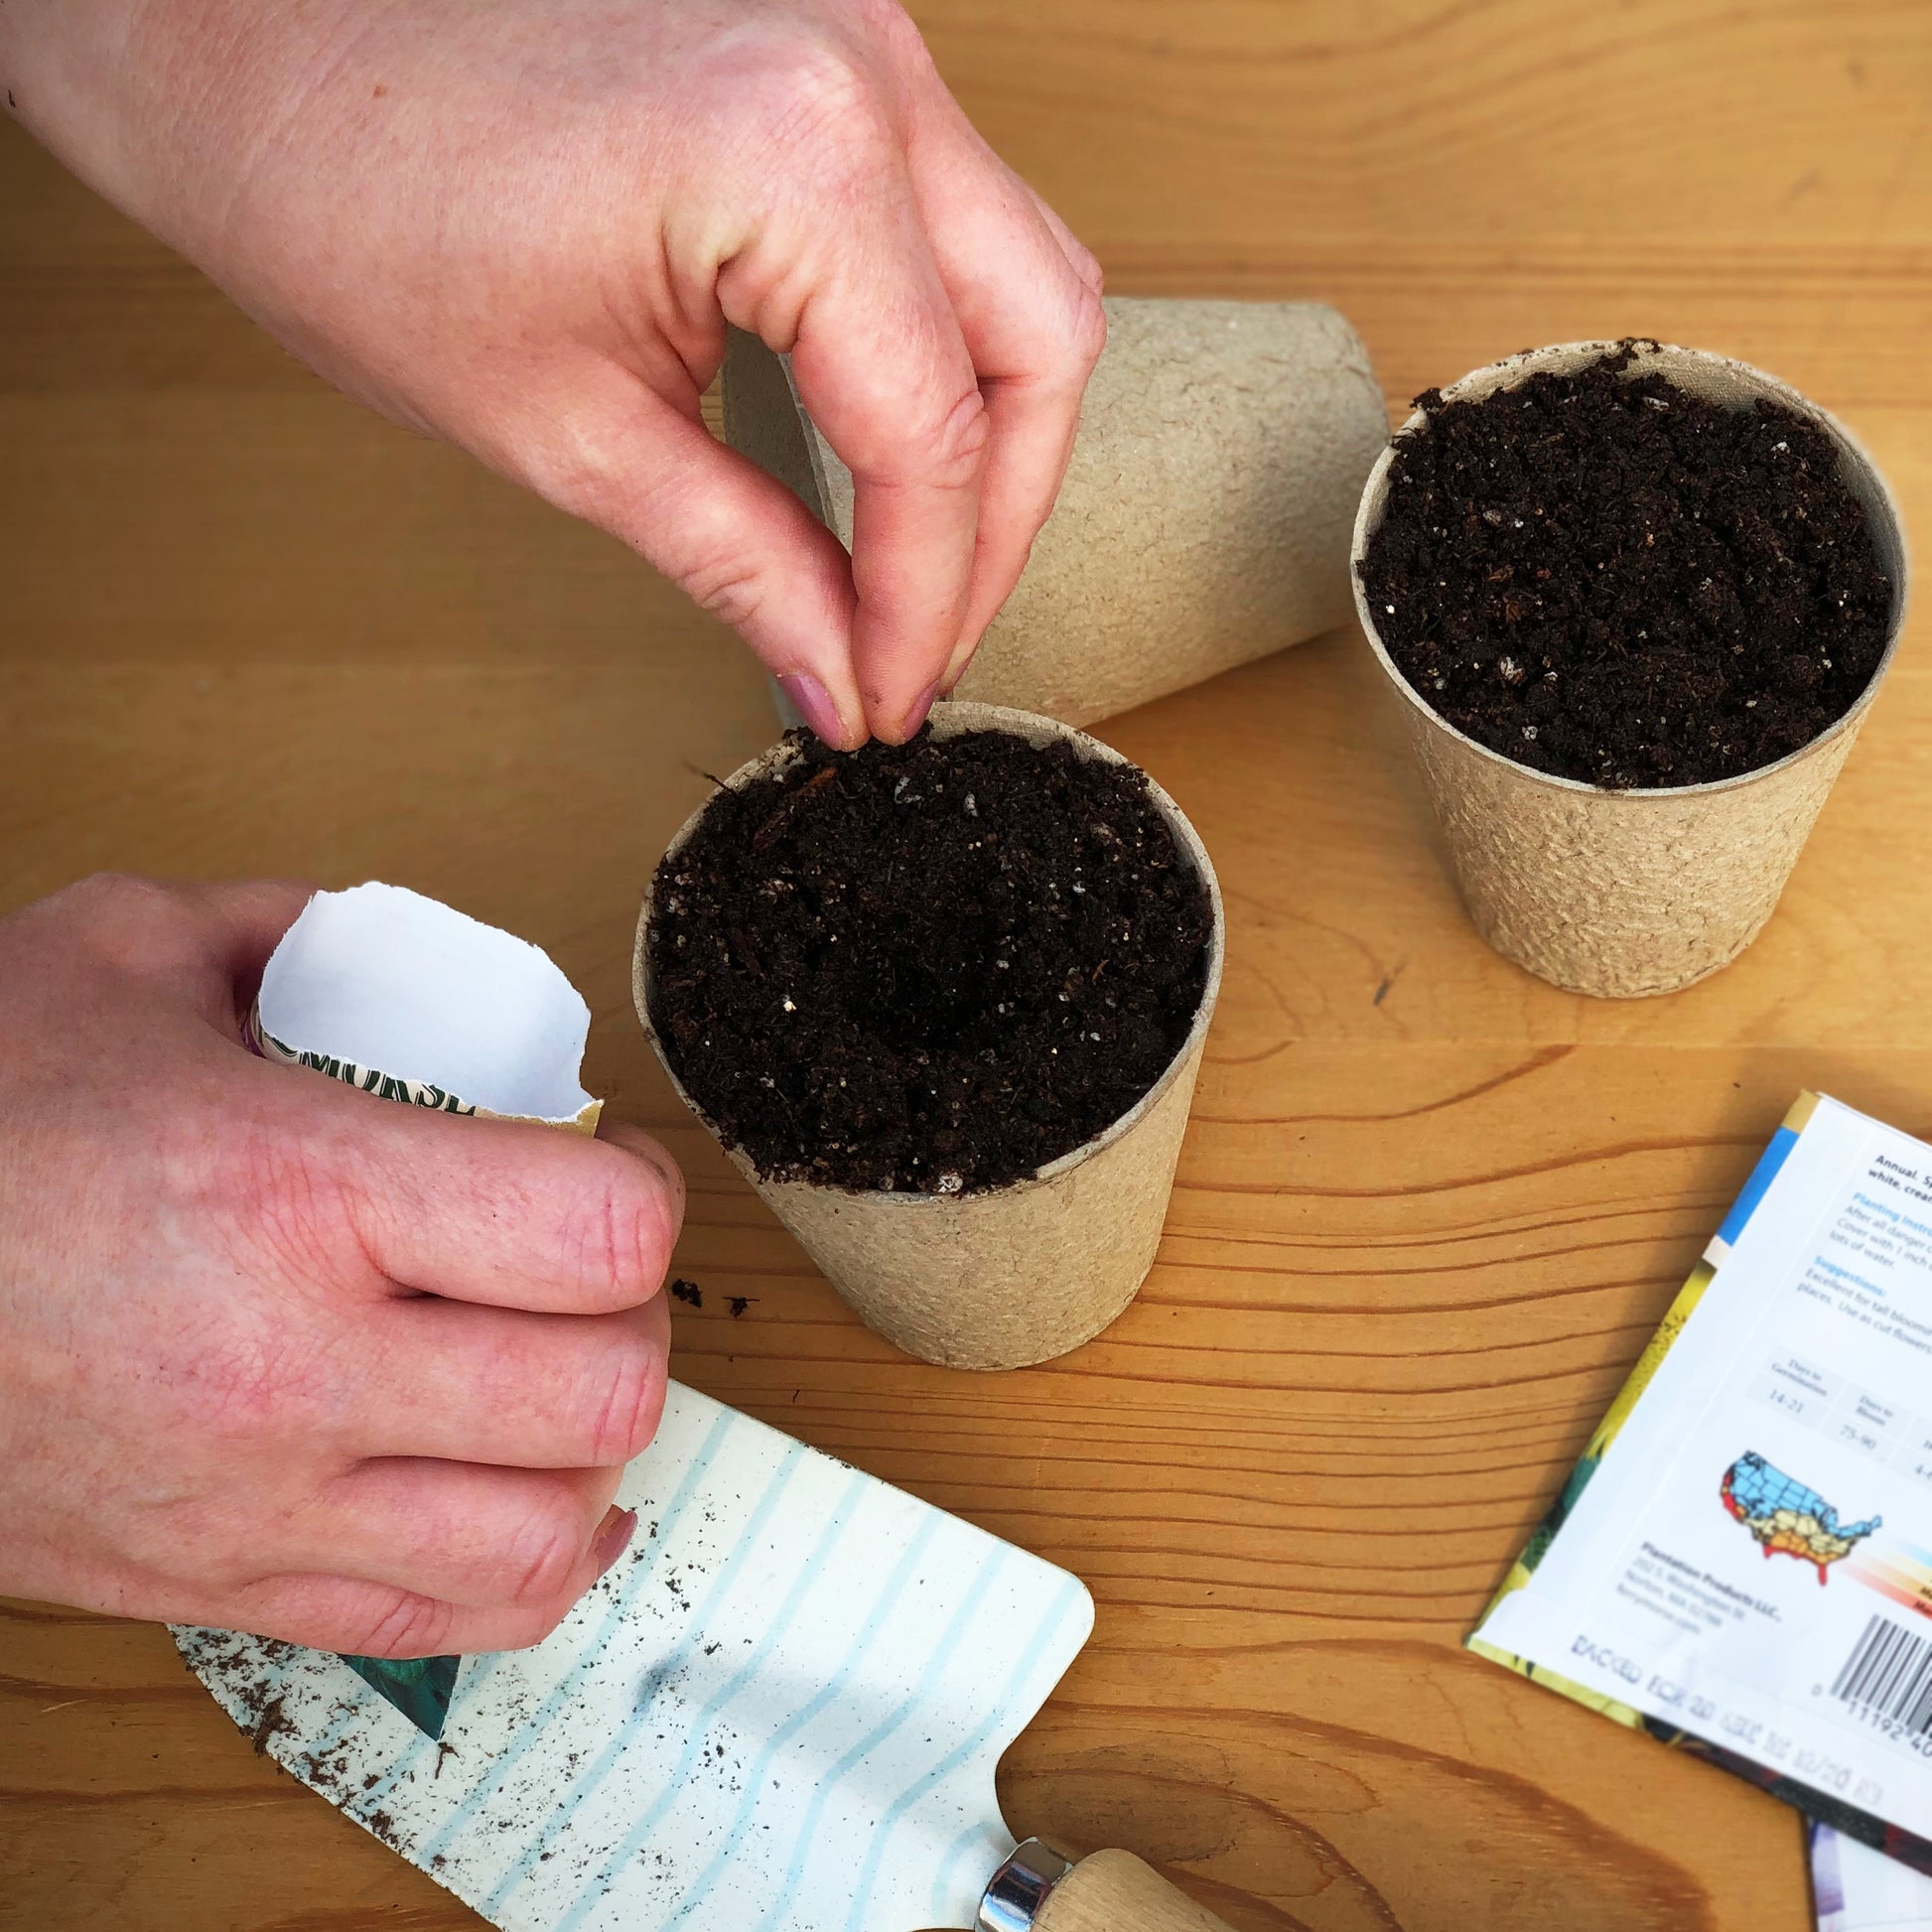 Start your Garden Leader Monster Tomato seeds in biodegradable peat pots or paper pots filled with seed starting mix.